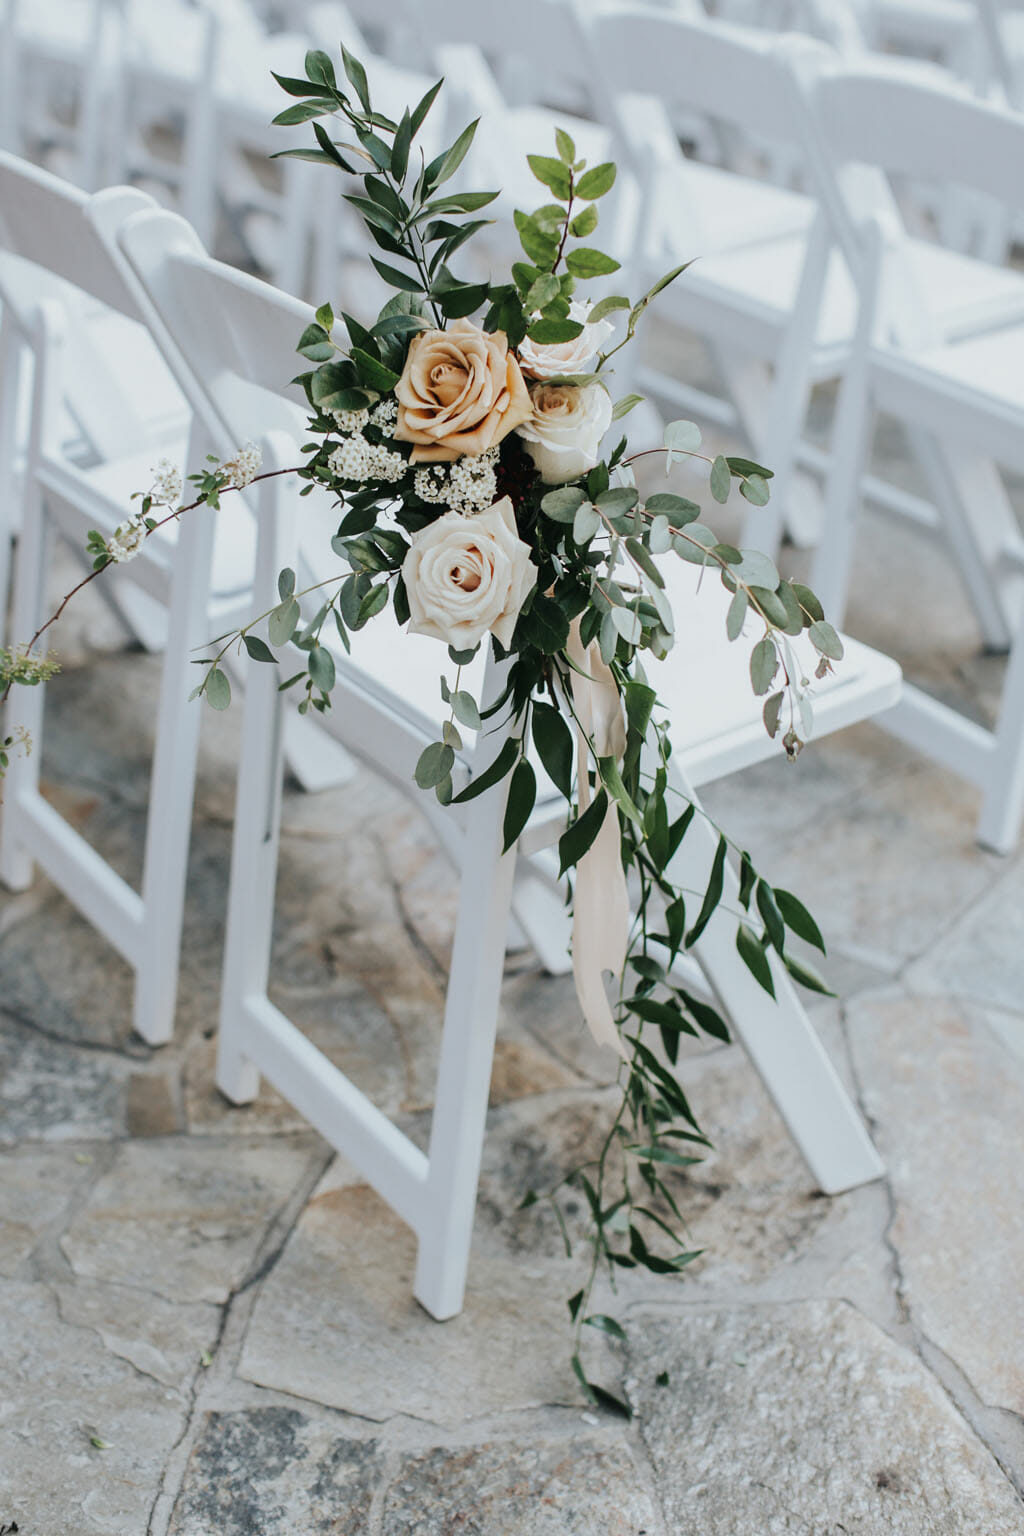 roses and greenery floral details at outdoor wedding ceremony